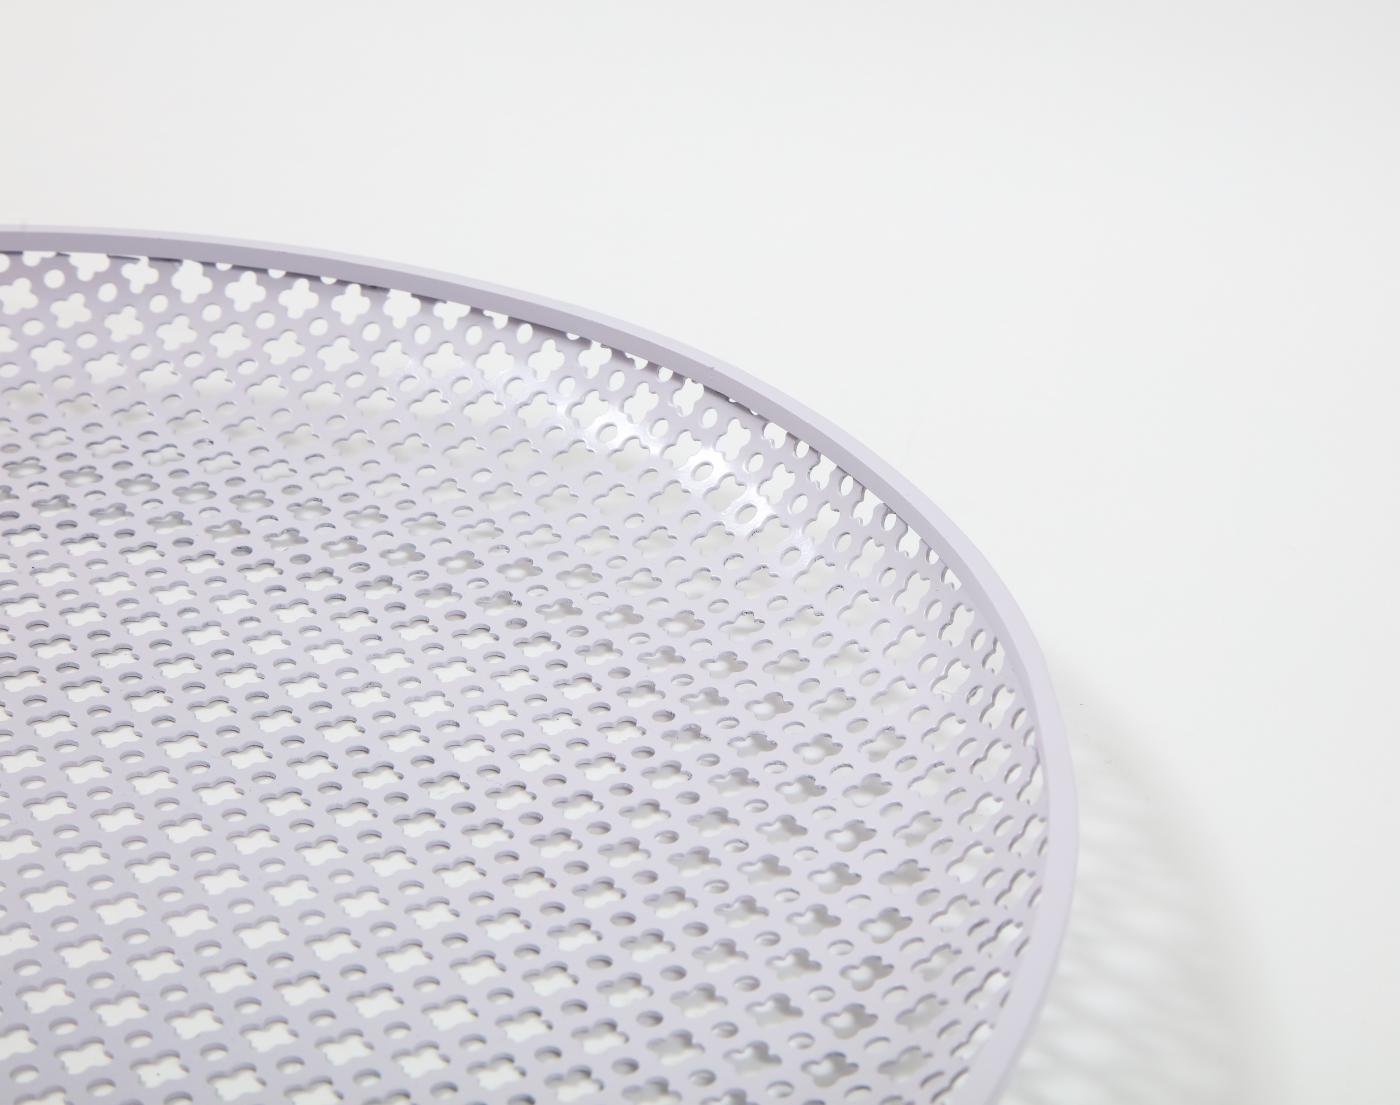 White Round Perforated Metal Tray by Mathieu Mategot, France, c. 1950 For Sale 3